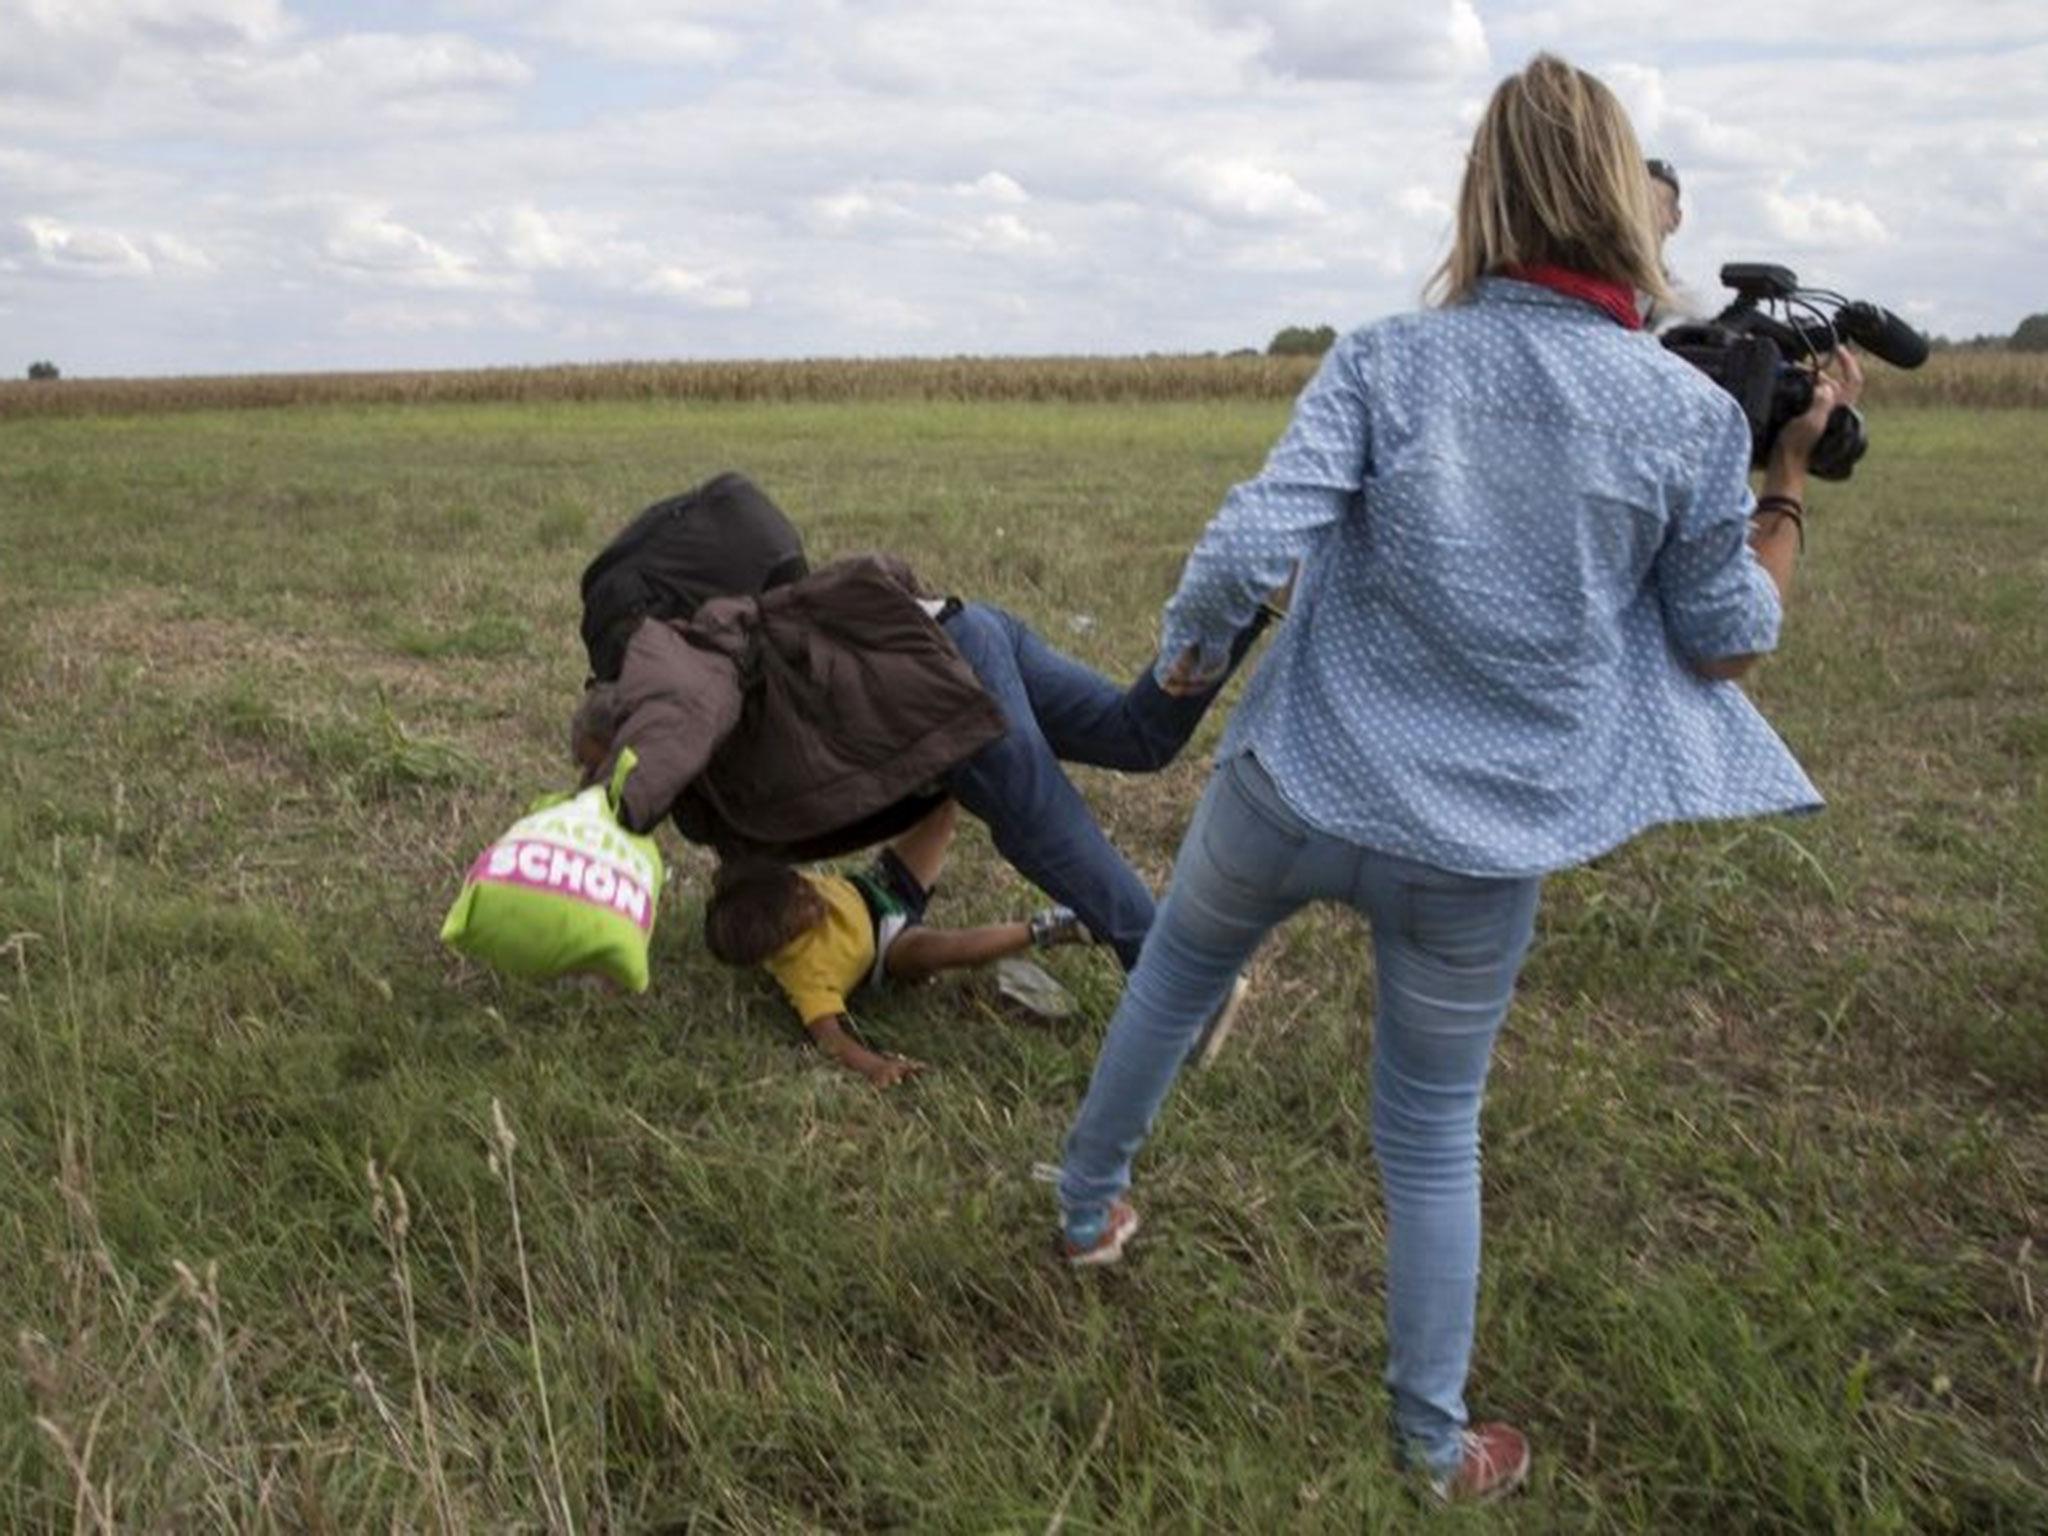 A refugee carrying a child falls after tripping on a TV camera operator while trying to escape from a collection point in Roszke village